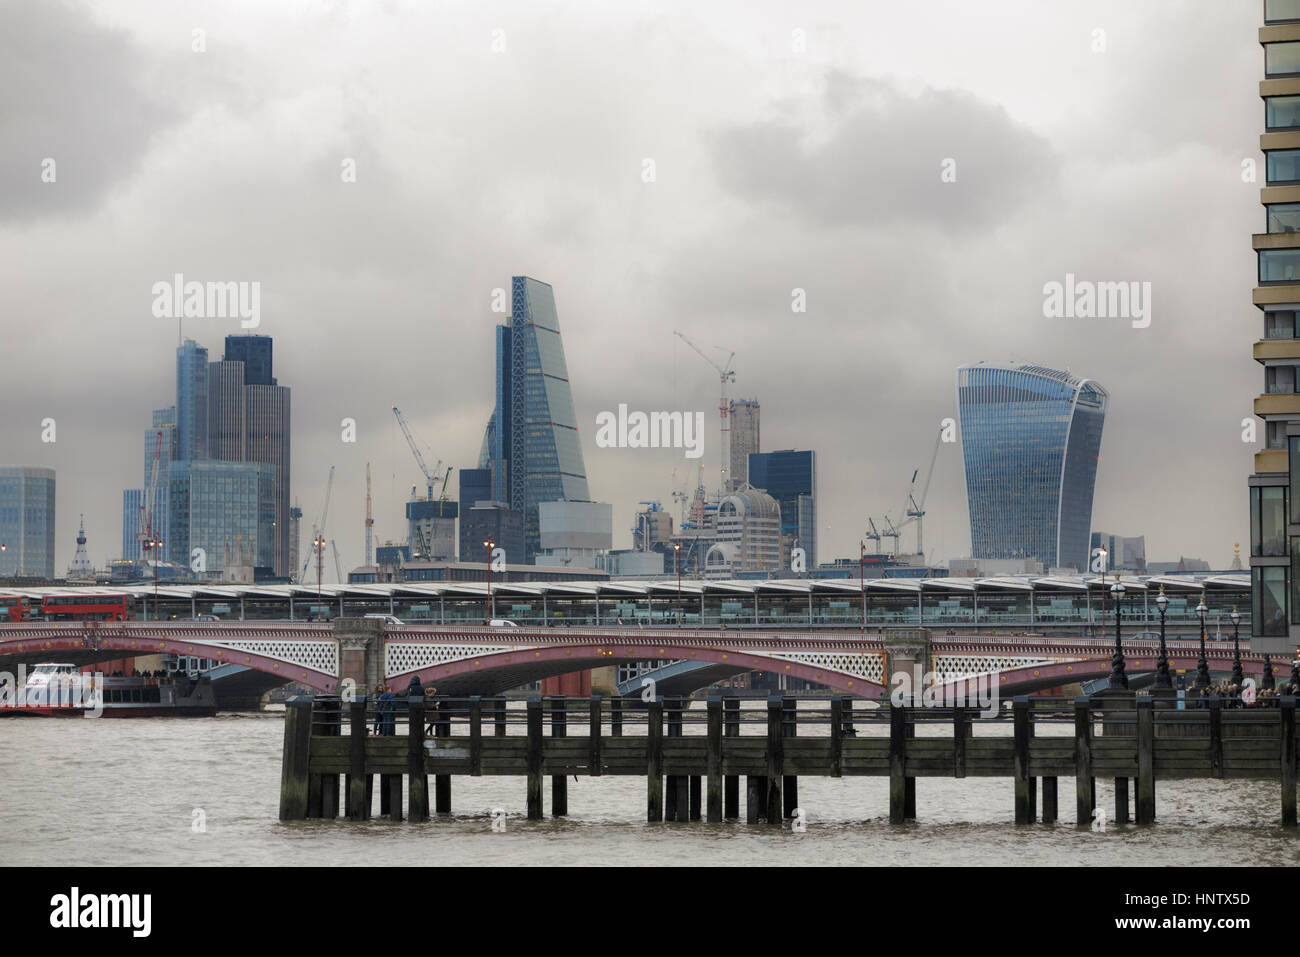 Tower 42, Cheesegrater, Walkie Talkie, iconic skyscrapers on the City of London financial district skyline and Blackfriars Bridge on dismal afternoon Stock Photo